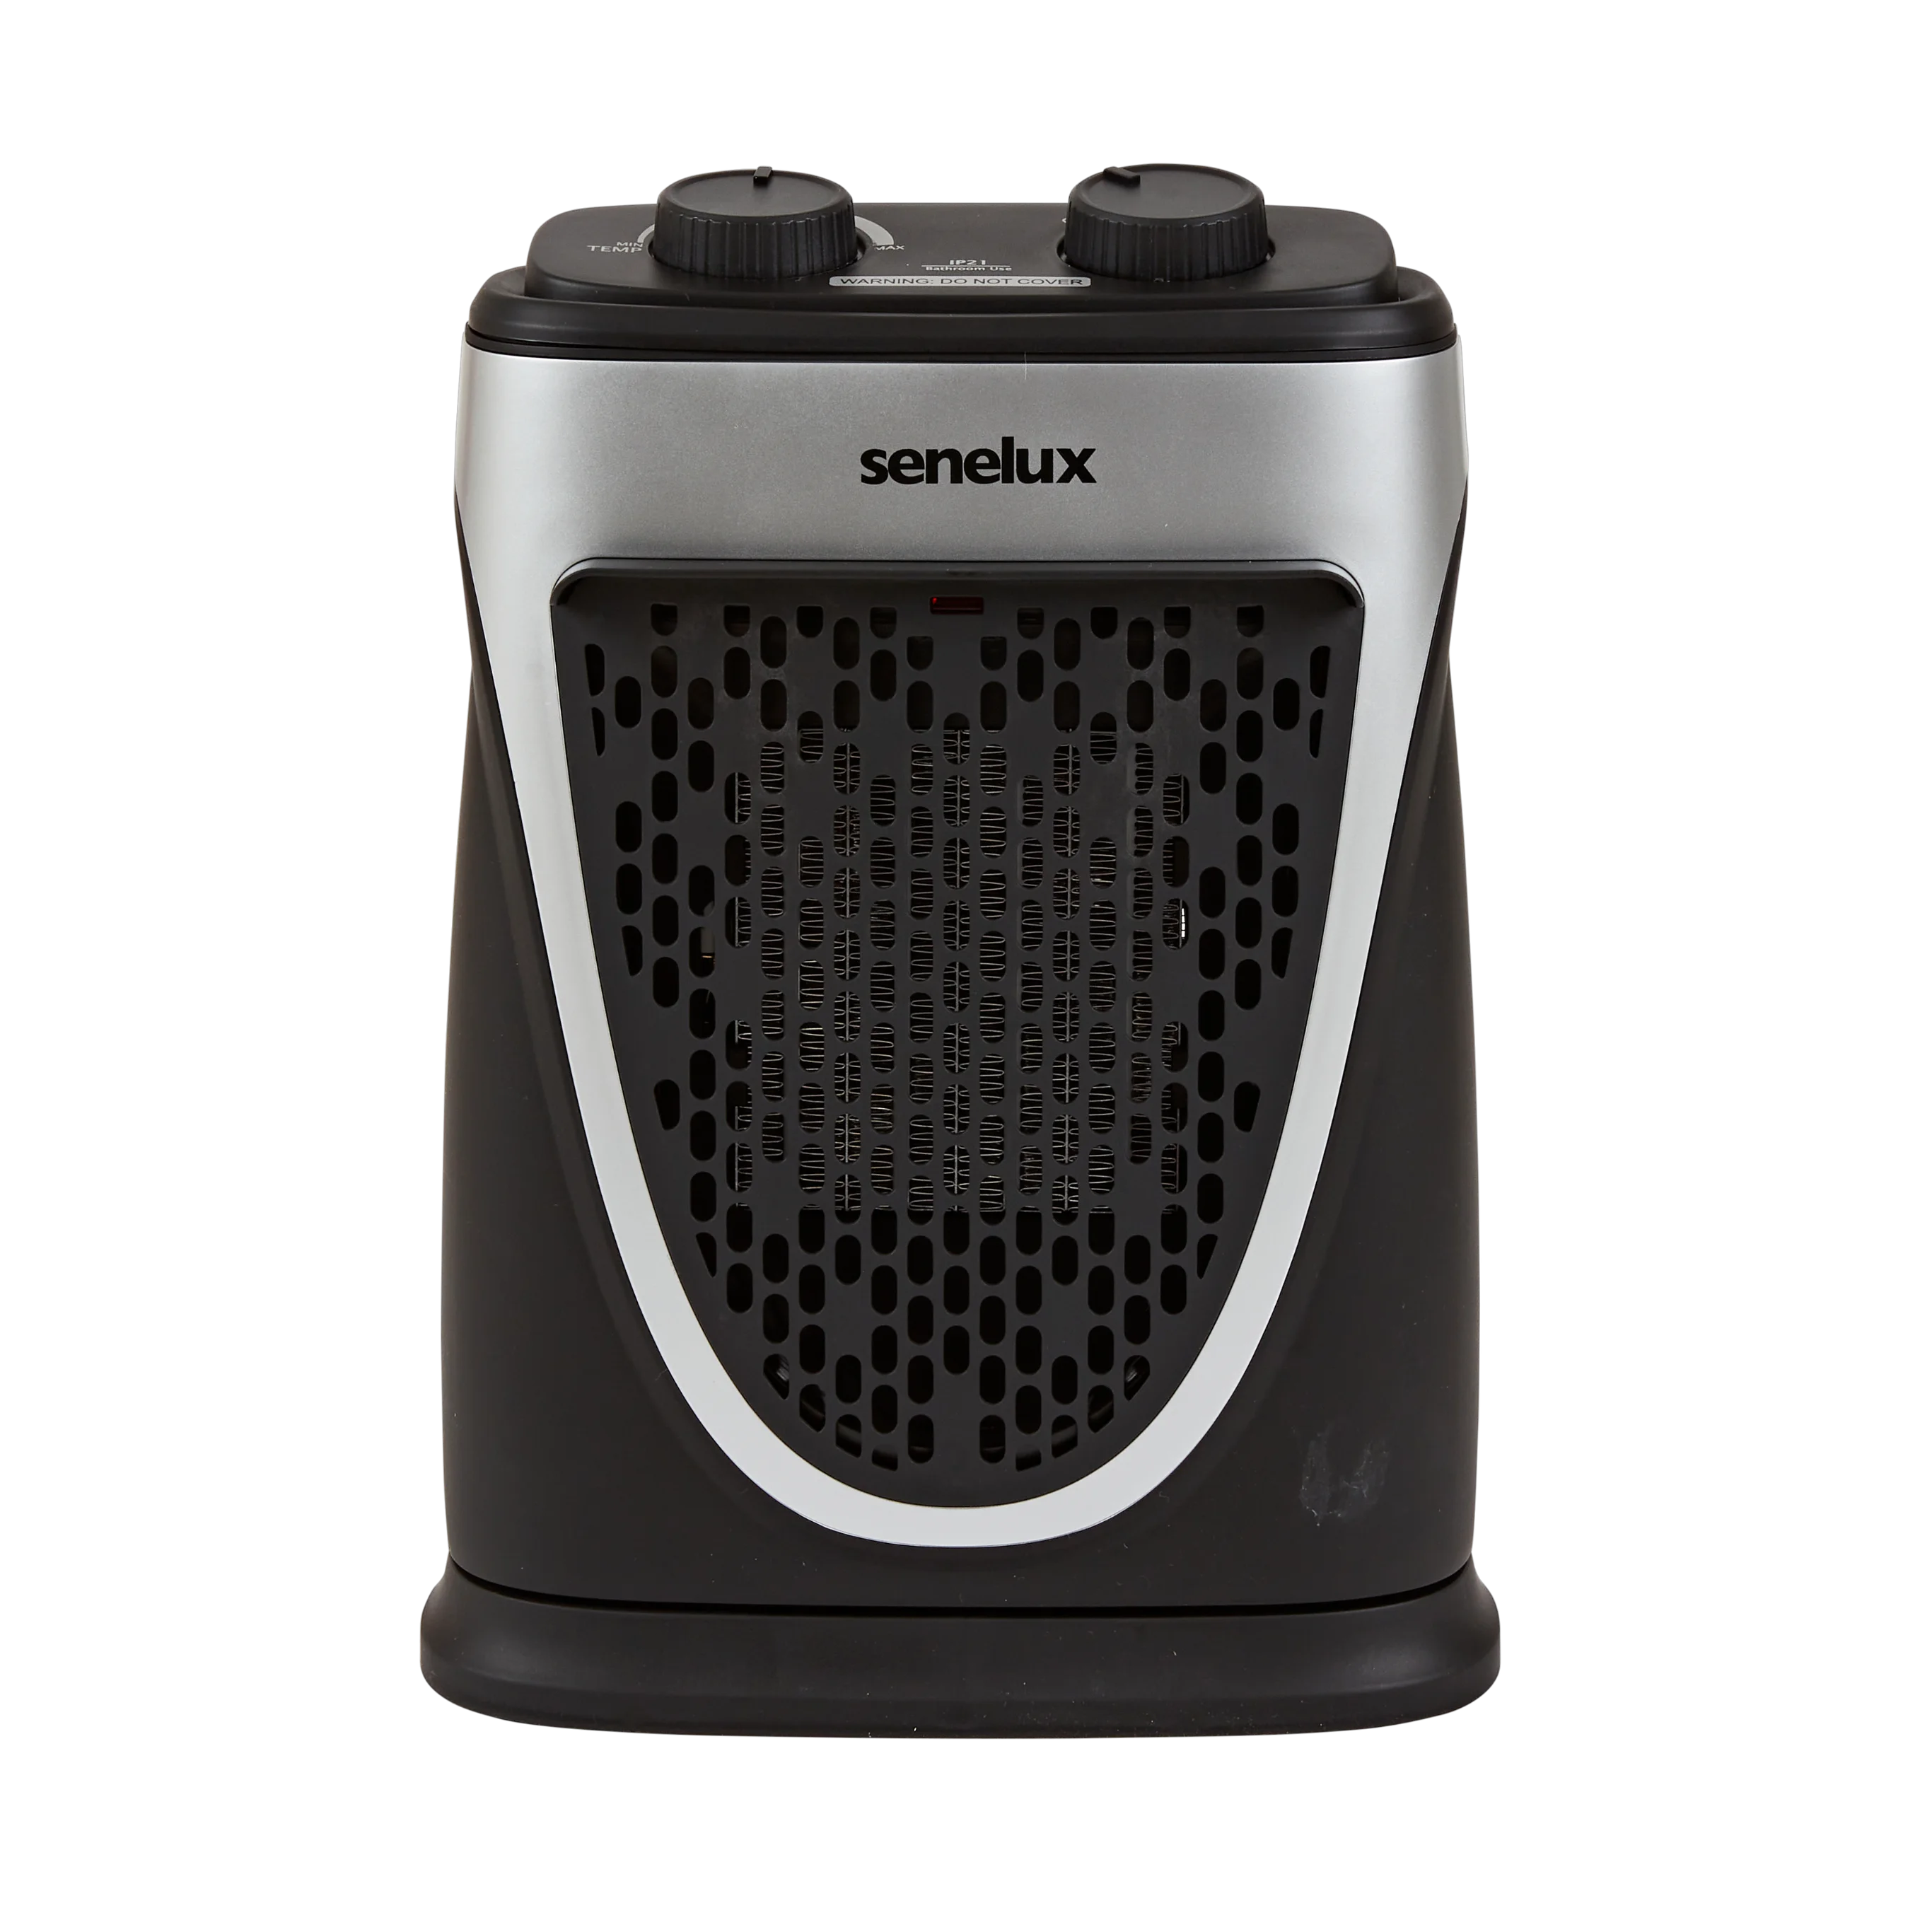 A picture of the black and silver Senelux mini heater taken from the front with the thermostat controls at the top.